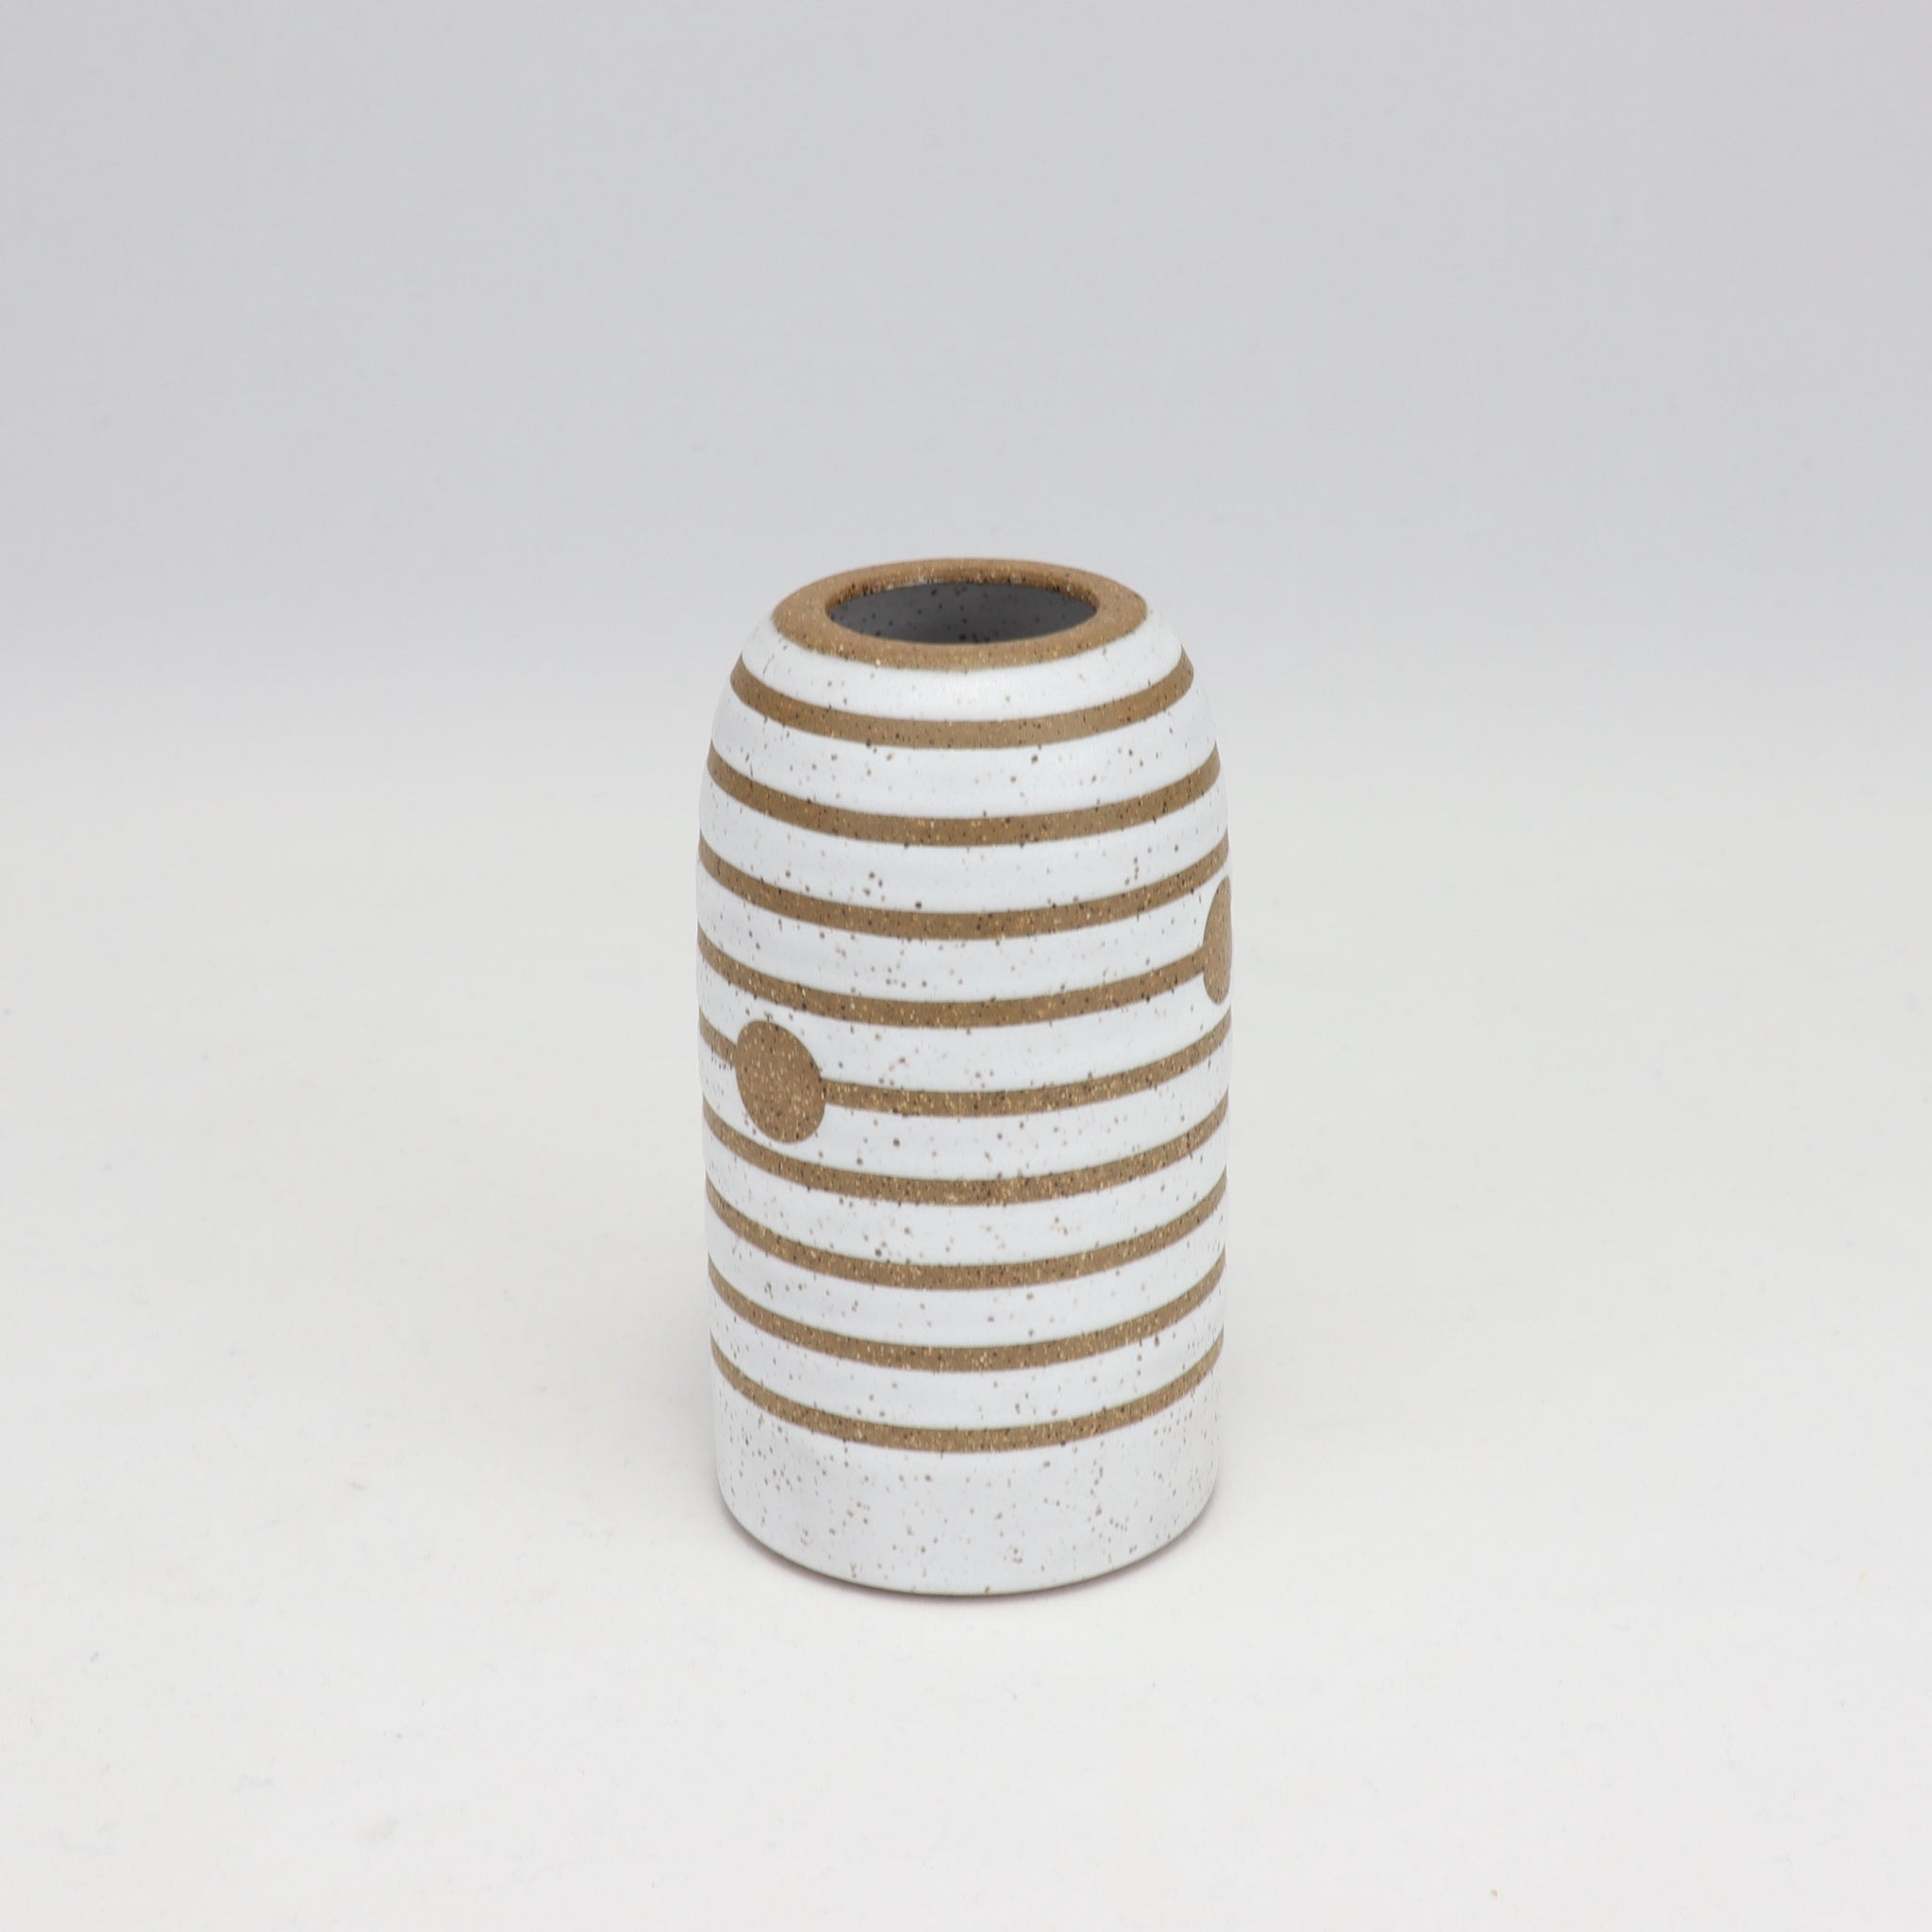 Electron Bud Vase 4.25 inches / 11 cm Tall (B5)